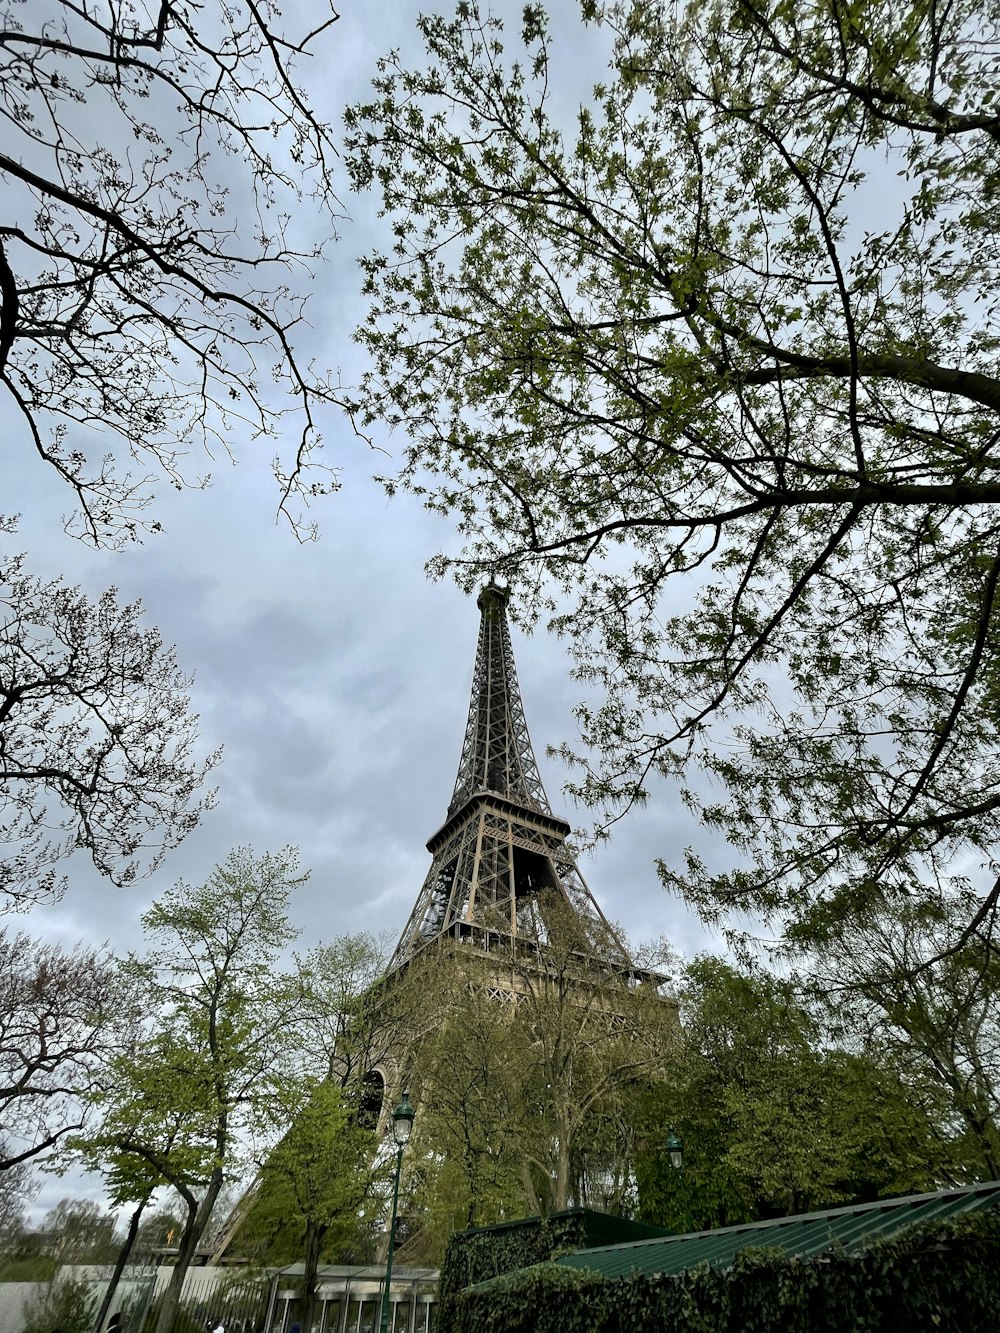 a view of the eiffel tower through the trees